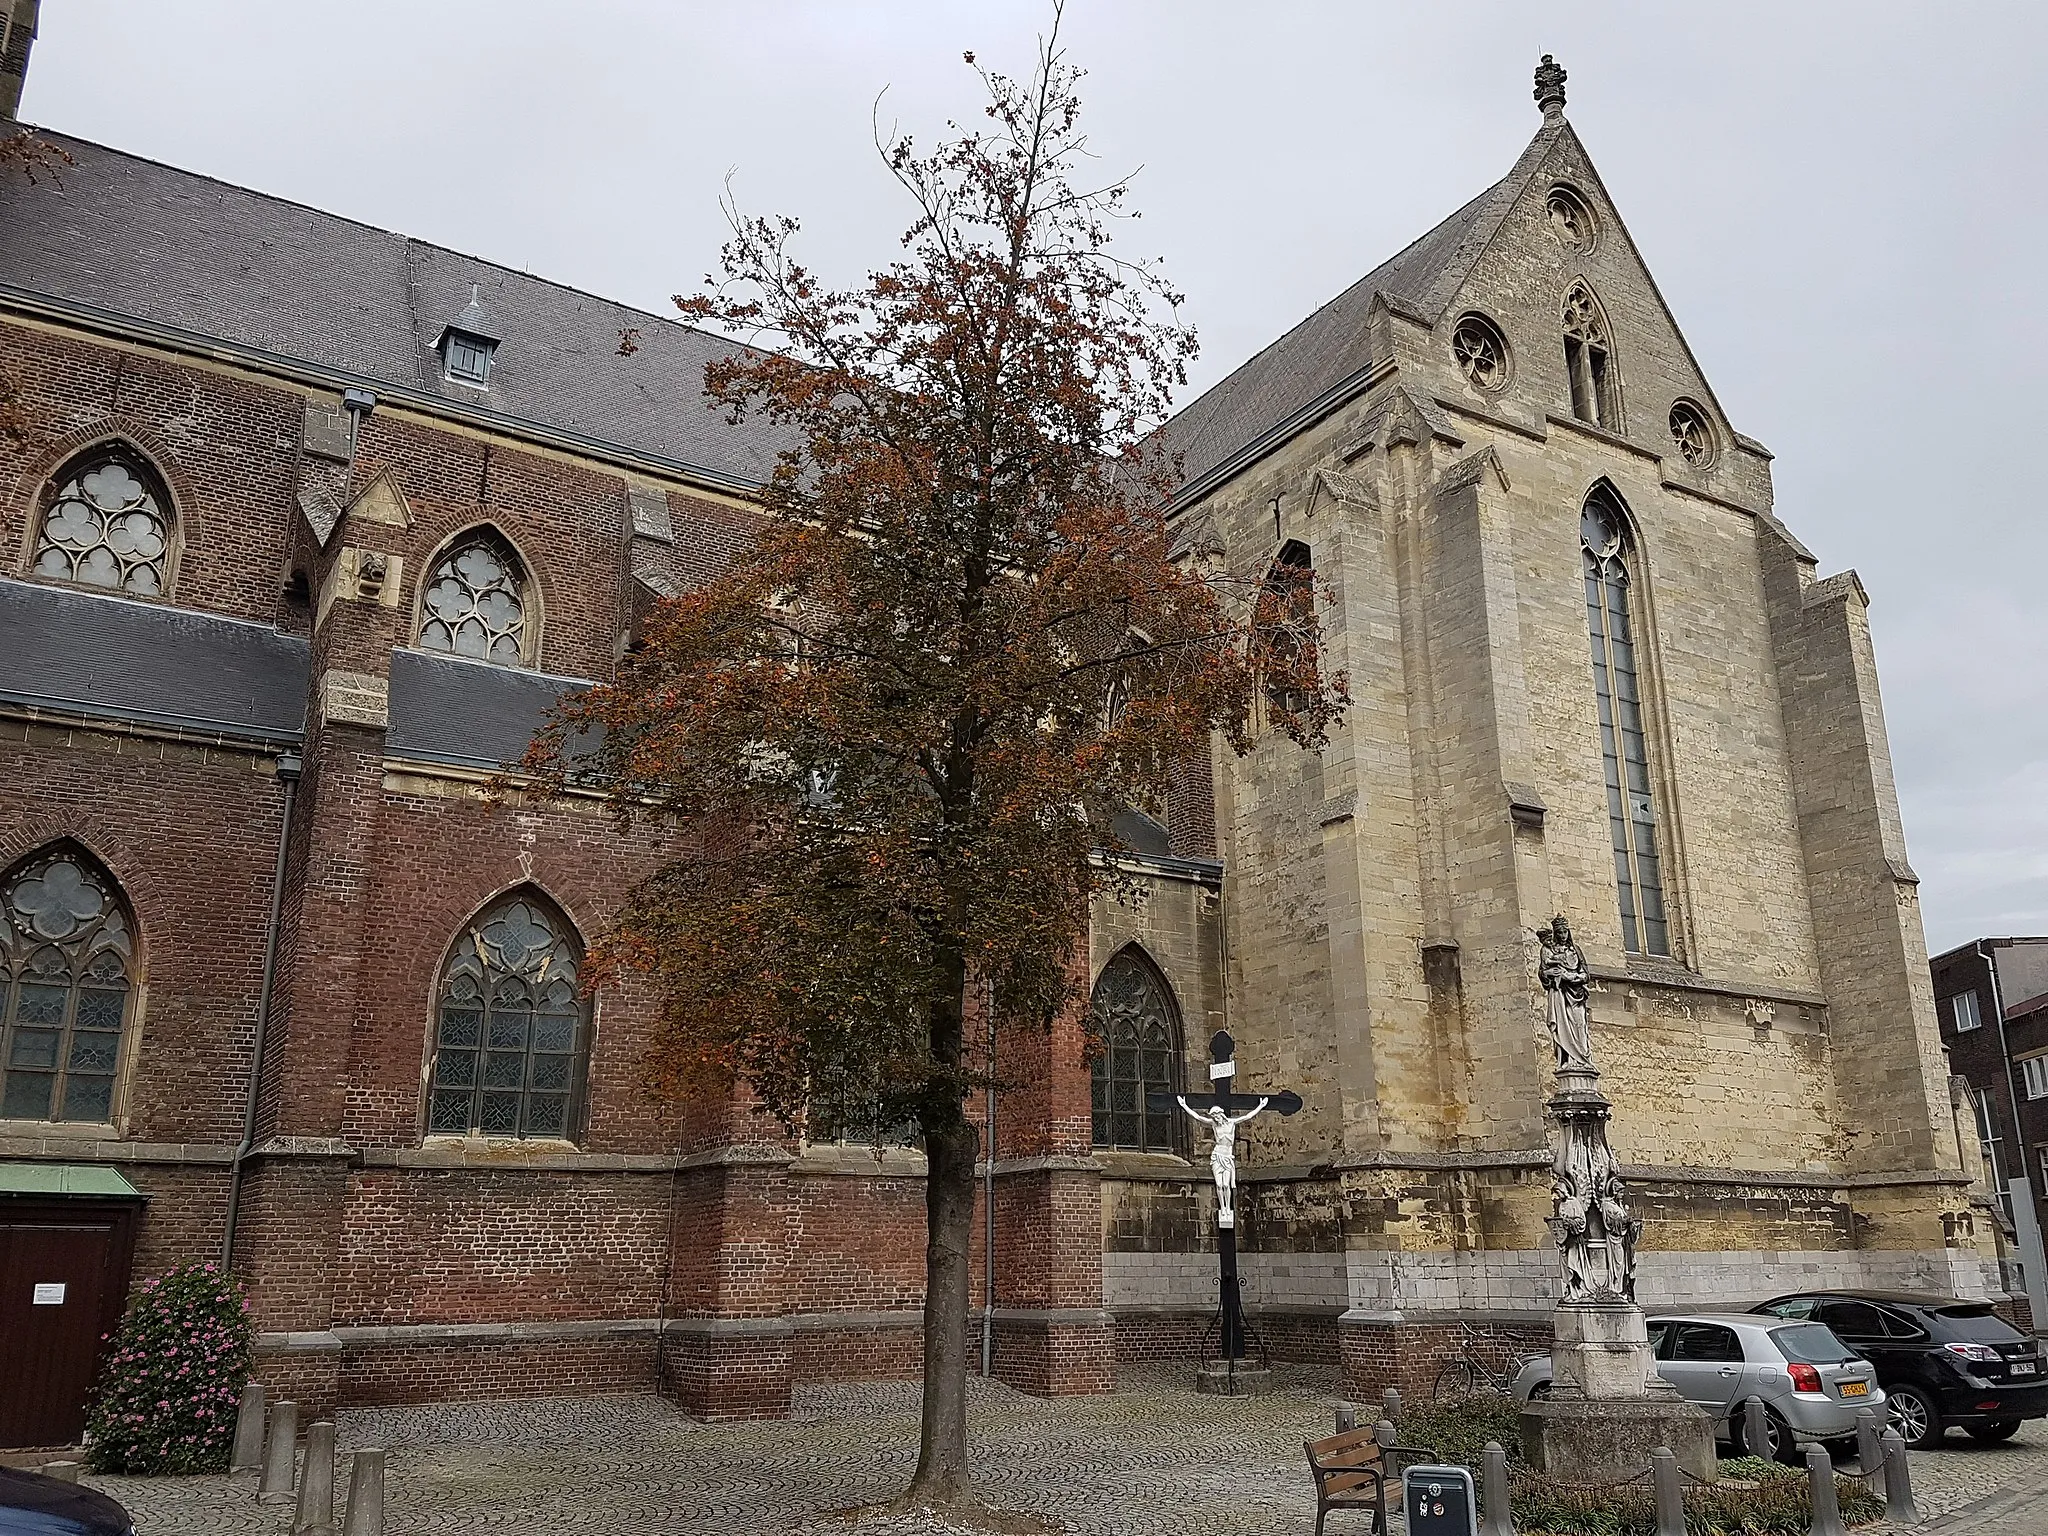 Photo showing: View of the medieval parish church of Saint Peter in the centre of Sittard, the Netherlands. In front of the church is a crucifix and a monument to the Virgin Mary.